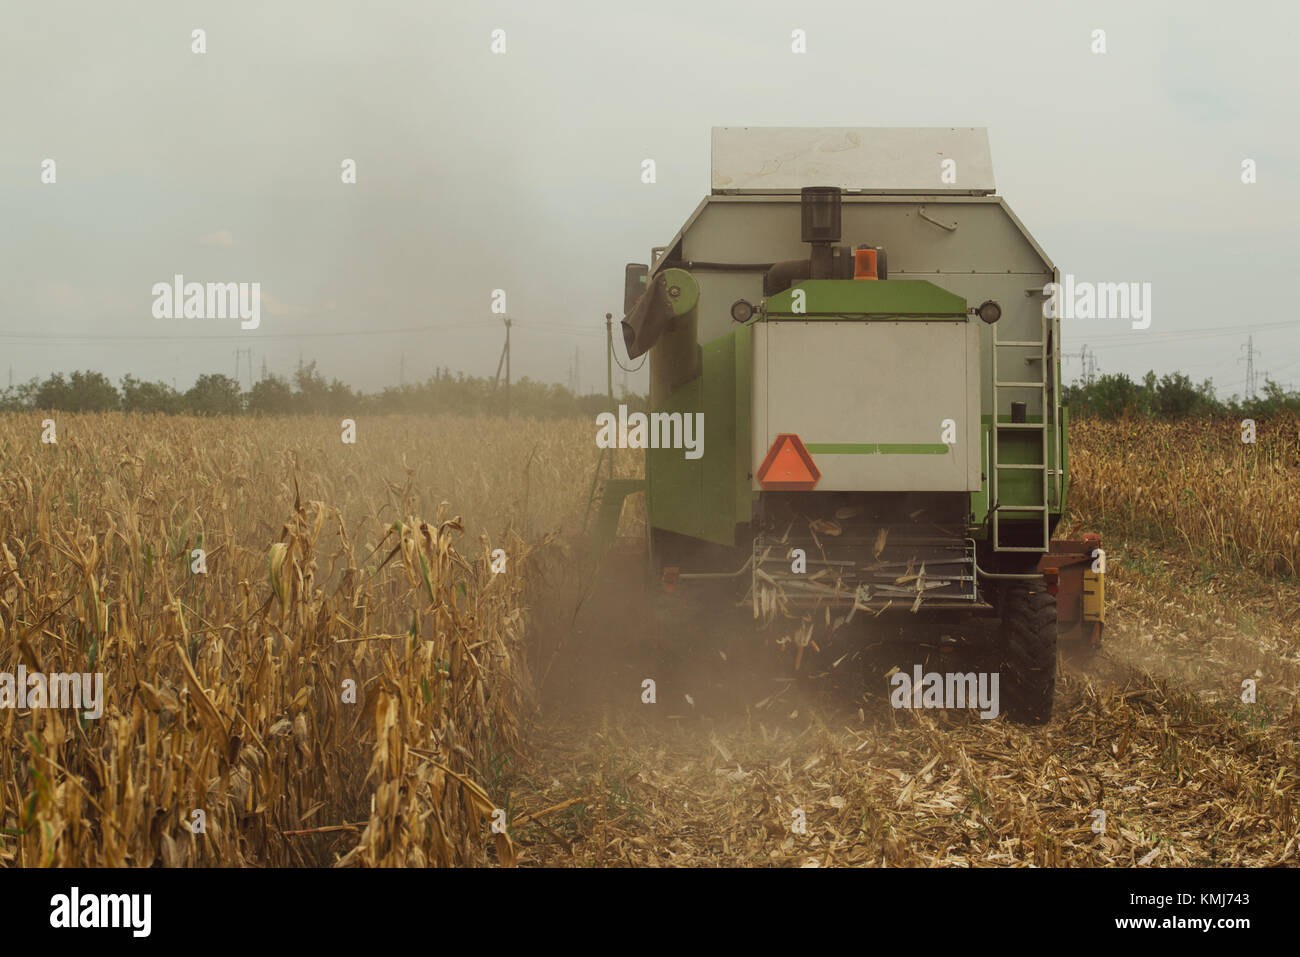 Harvesting corn crop field. Combine harvester working on plantation. Agricultural machinery gathering ripe maize crops. Stock Photo